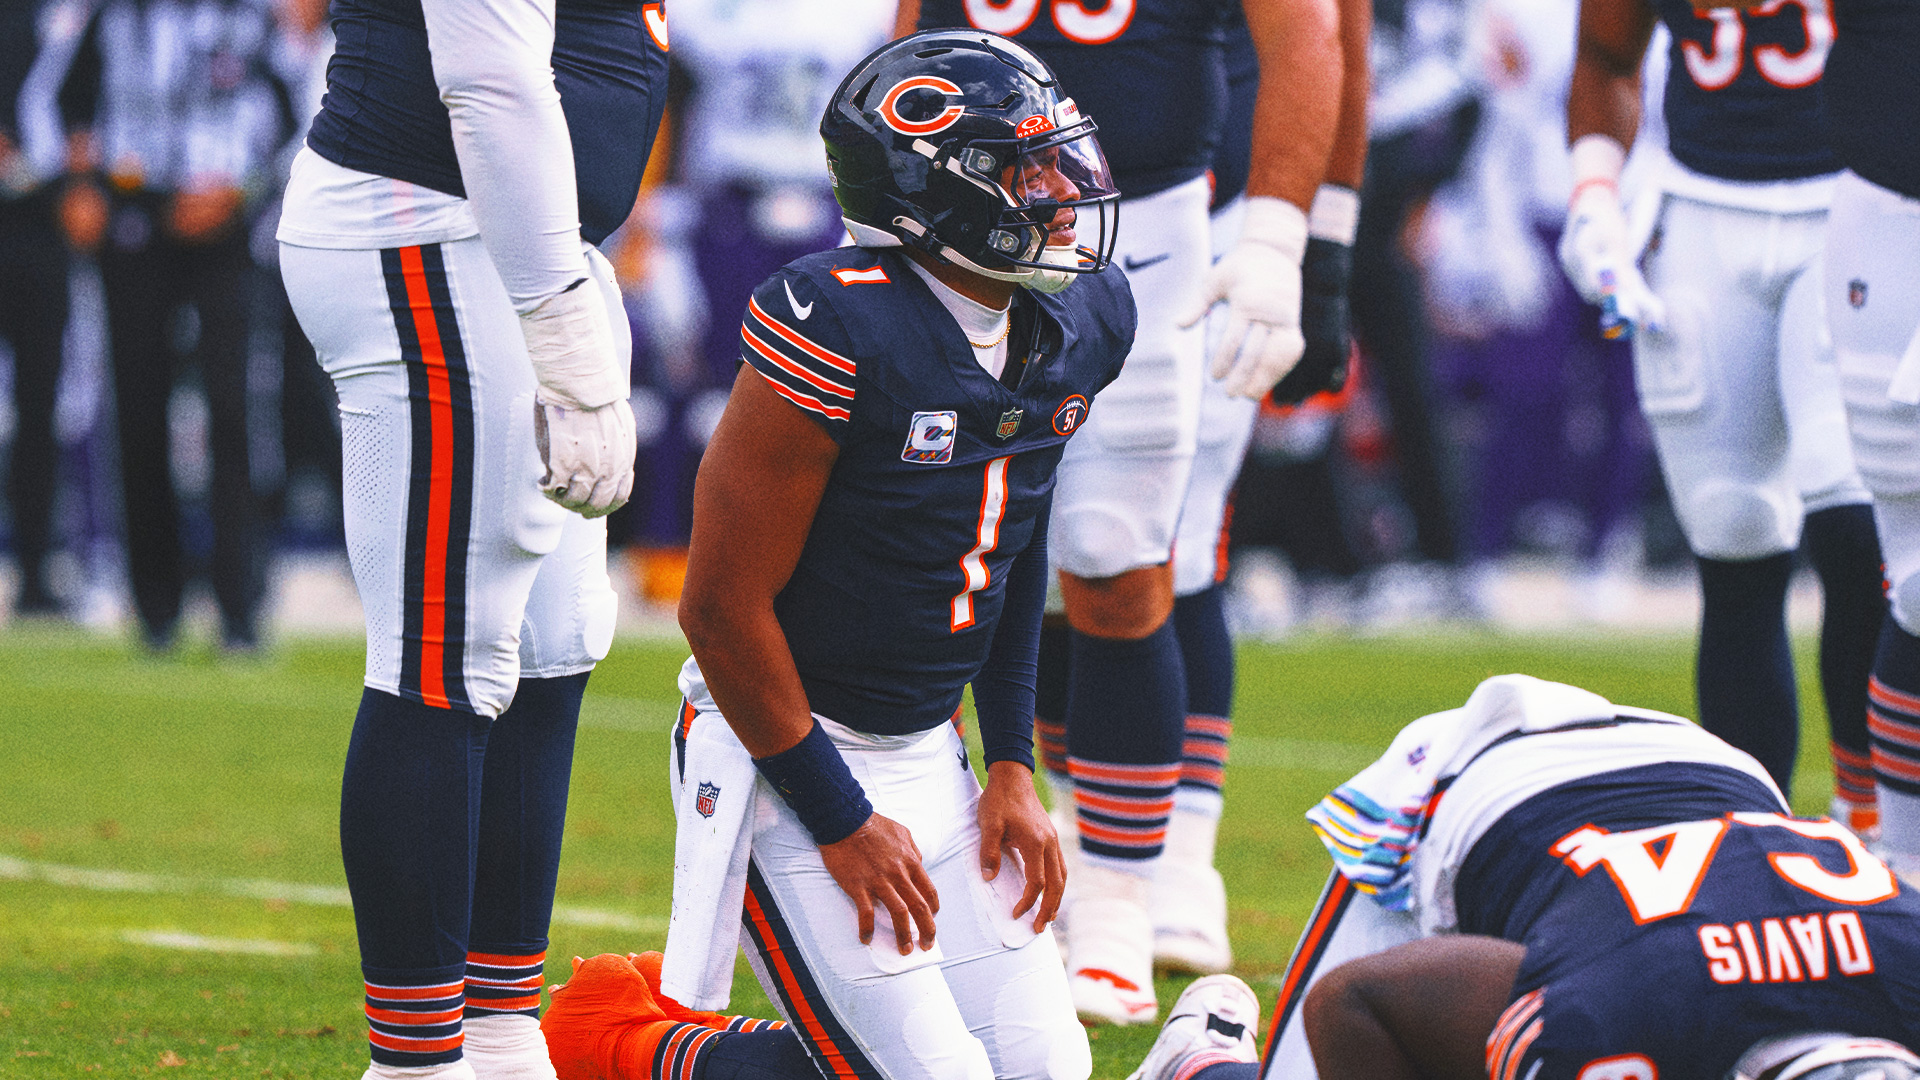 Bears fall to Vikings — and lose Justin Fields. One way or another, it's time to adjust